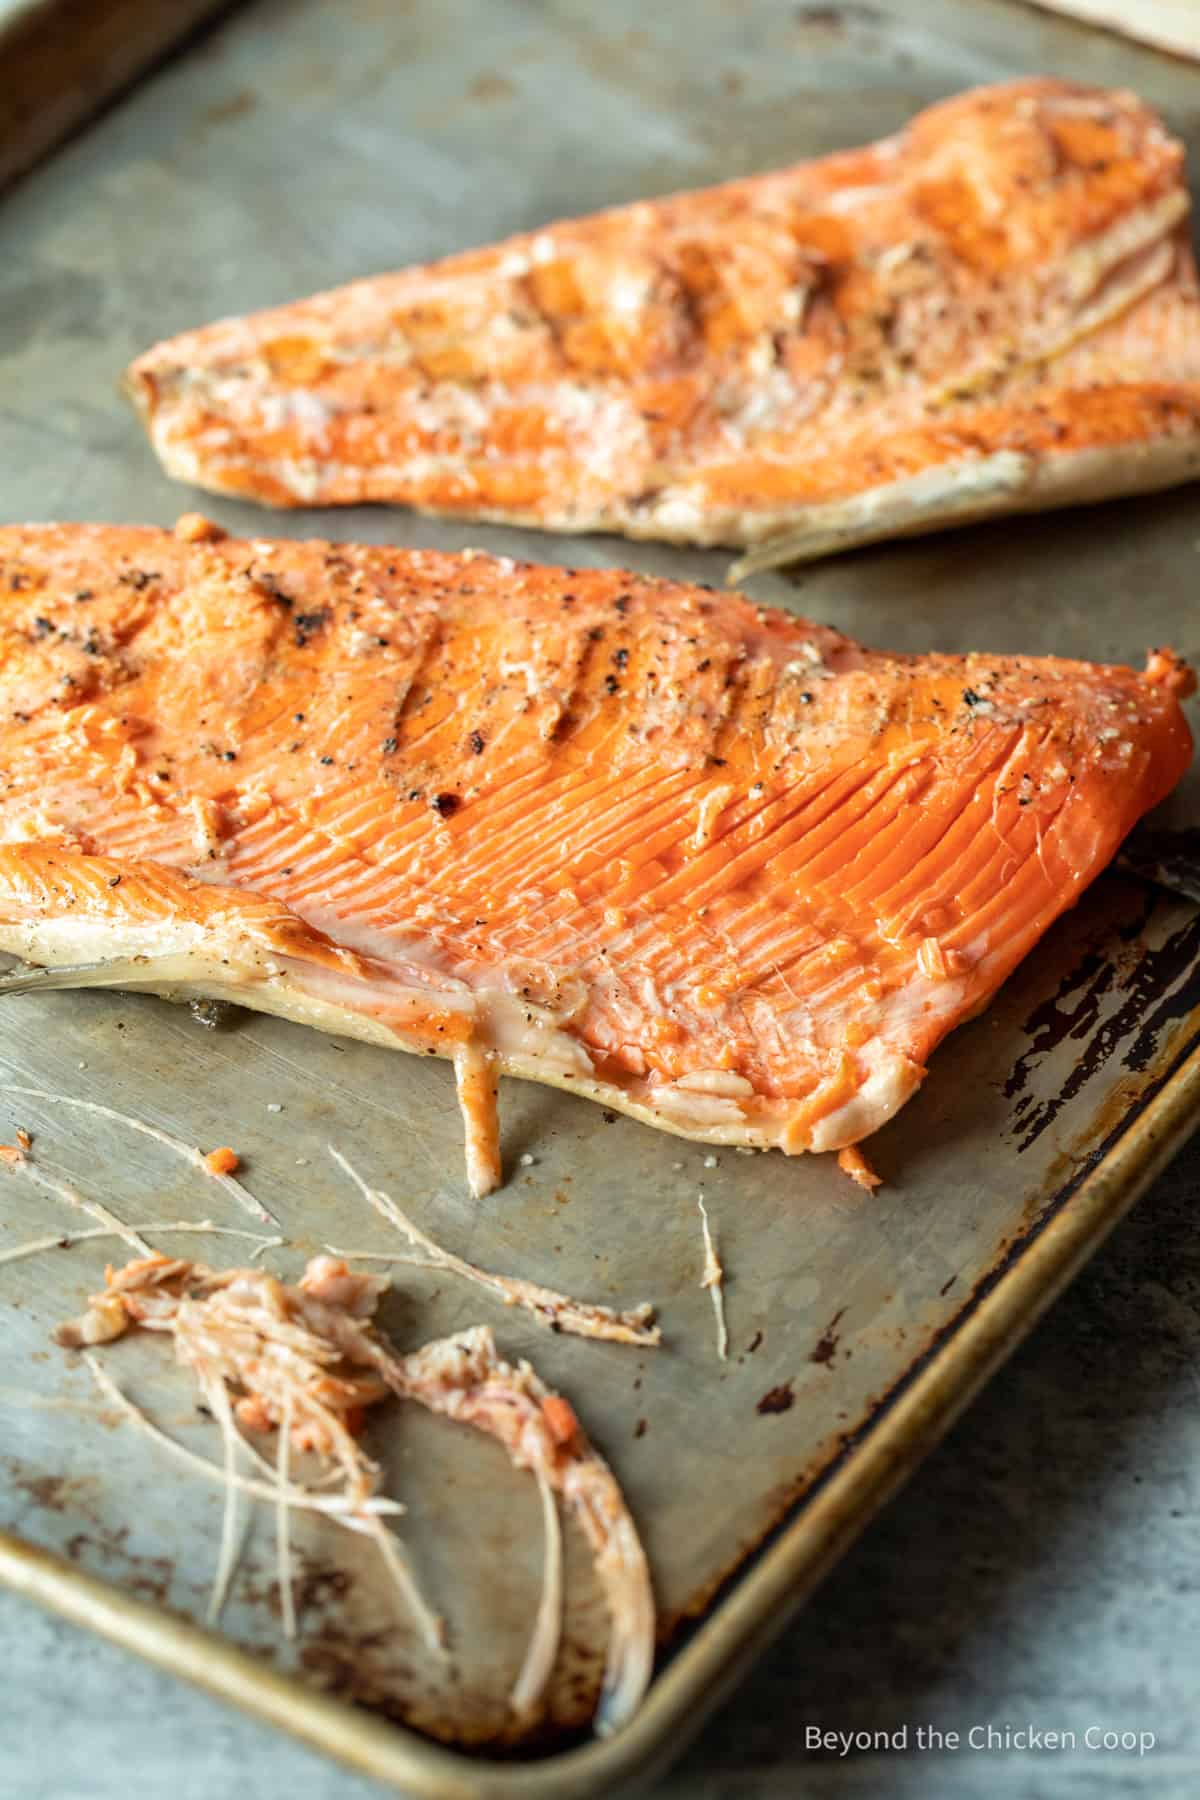 Removing bones from salmon fillets.